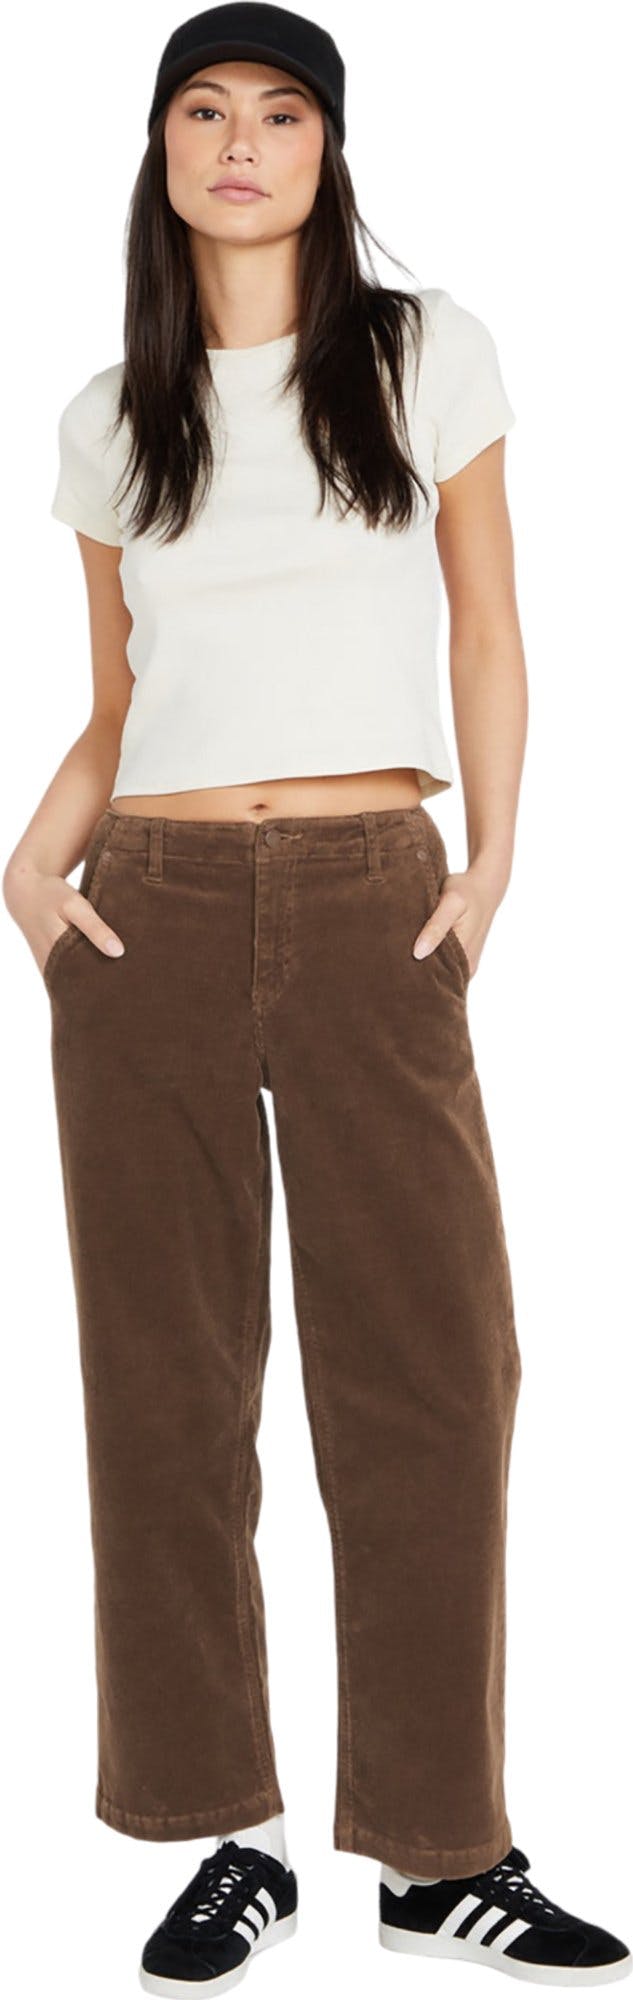 Product image for 1991 Stoned Low Rise Jeans - Women's